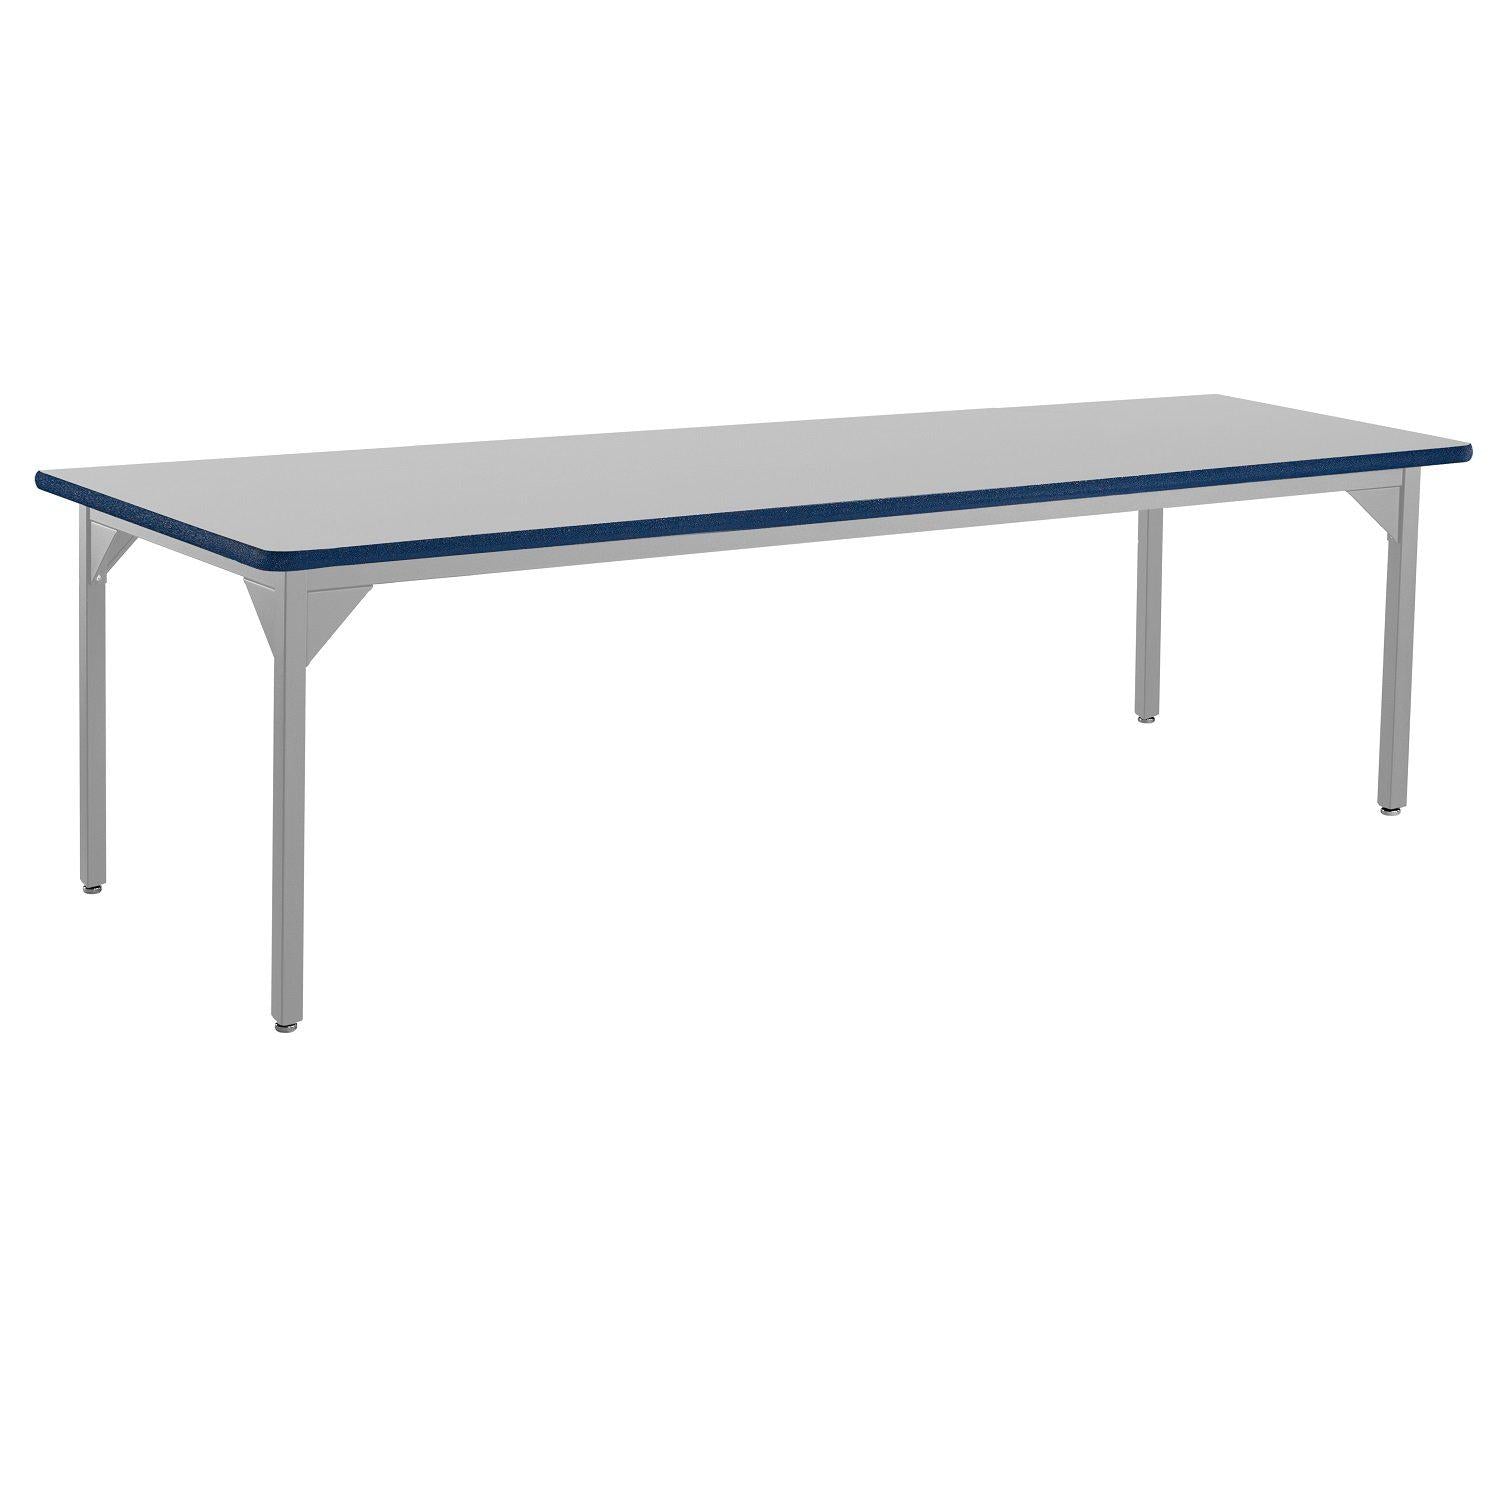 Heavy-Duty Fixed Height Utility Table, Soft Grey Frame, 42" x 72", Supreme High-Pressure Laminate Top with Black ProtectEdge